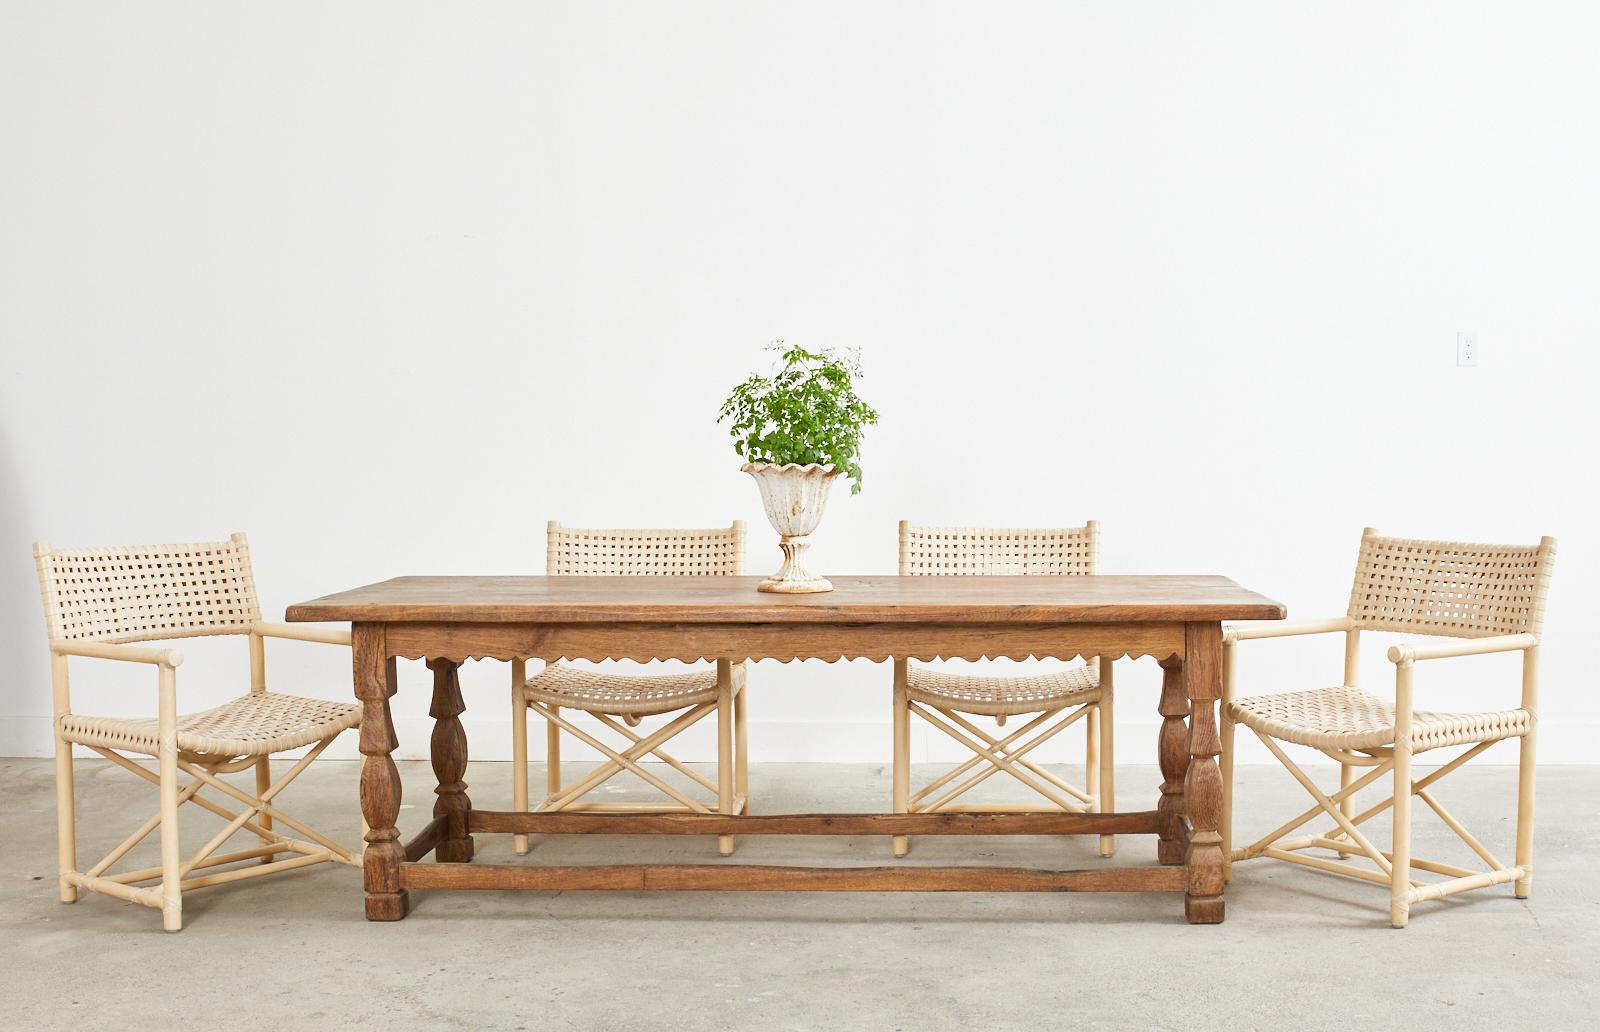 Rustic 19th century country French provincial farmhouse harvest or dining table hand-crafted from oak. The table features a trestle style base with a whimsical scalloped apron on all sides. The table is supported by shaped square legs conjoined by